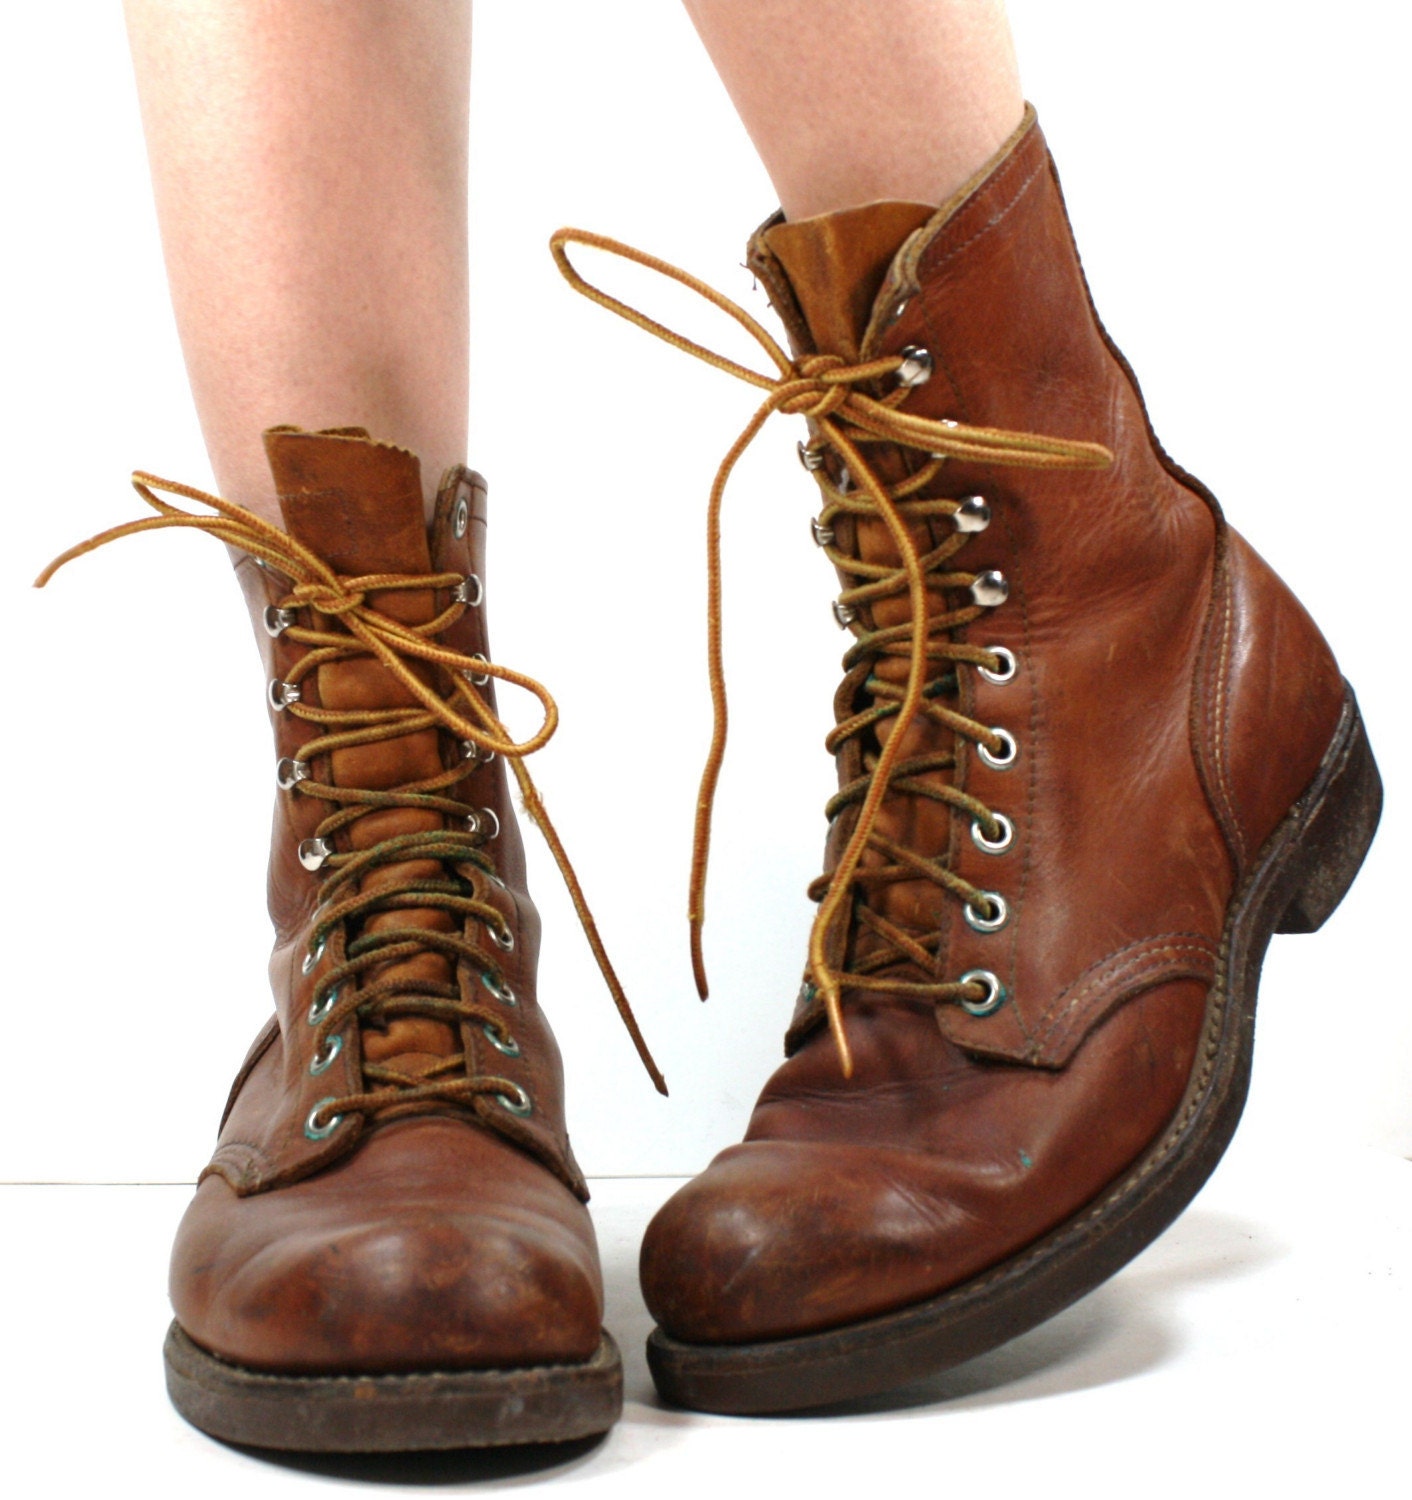 Vintage grunge granny COMBAT barn boot riding Red WING womens Brown cowboy pixie lace up 9.5 M B